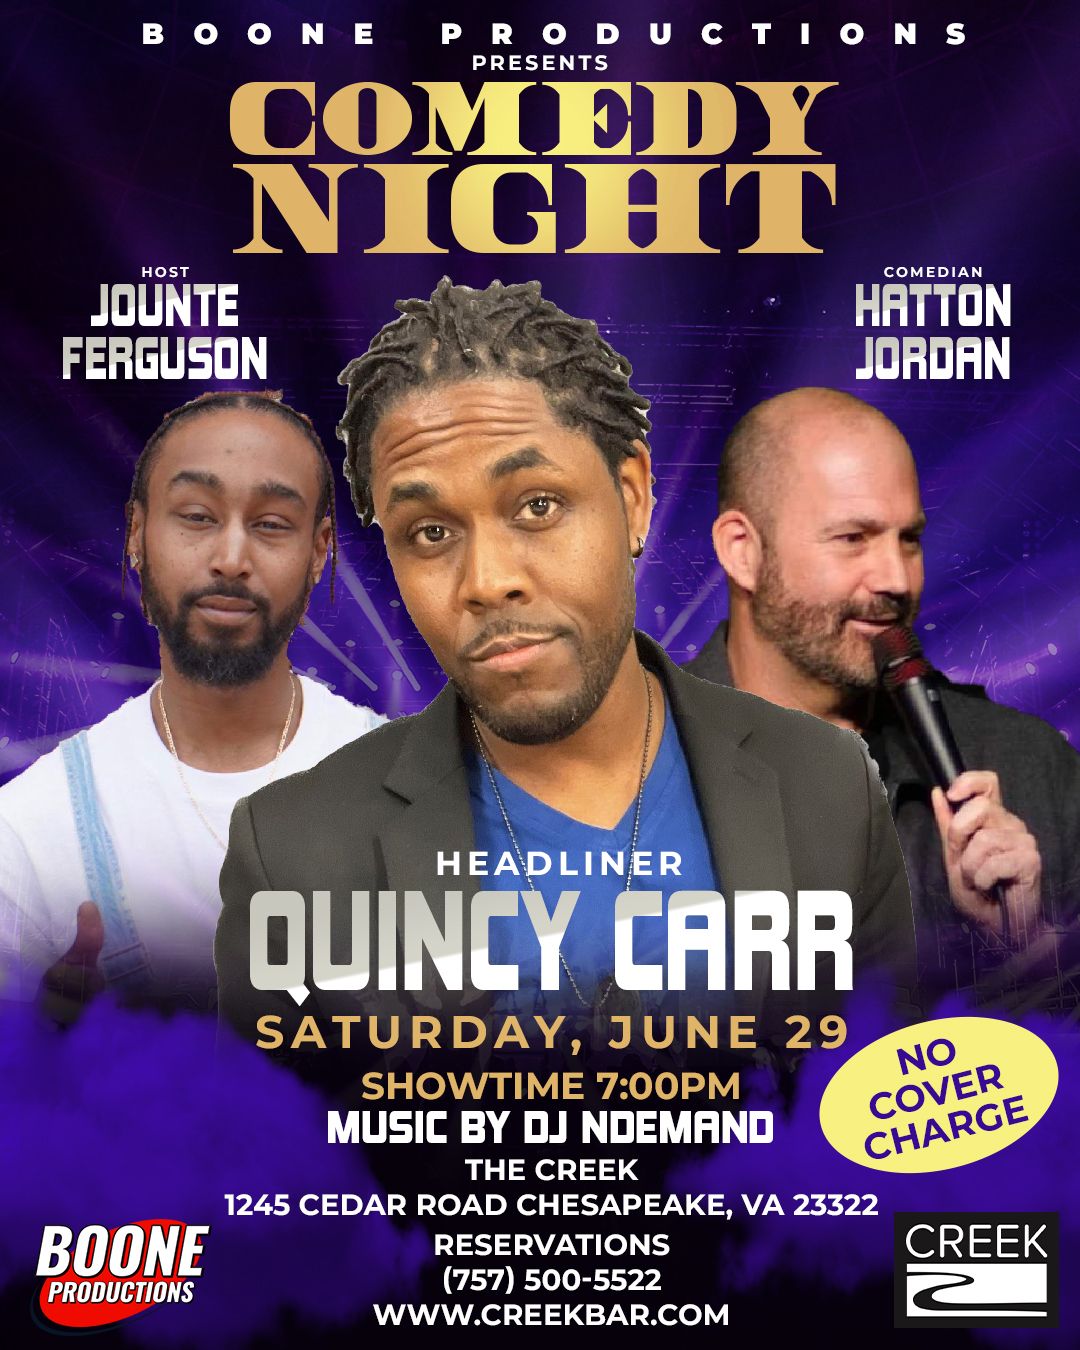 Free Comedy Show at The Creek: Headliner Quincy Carr!